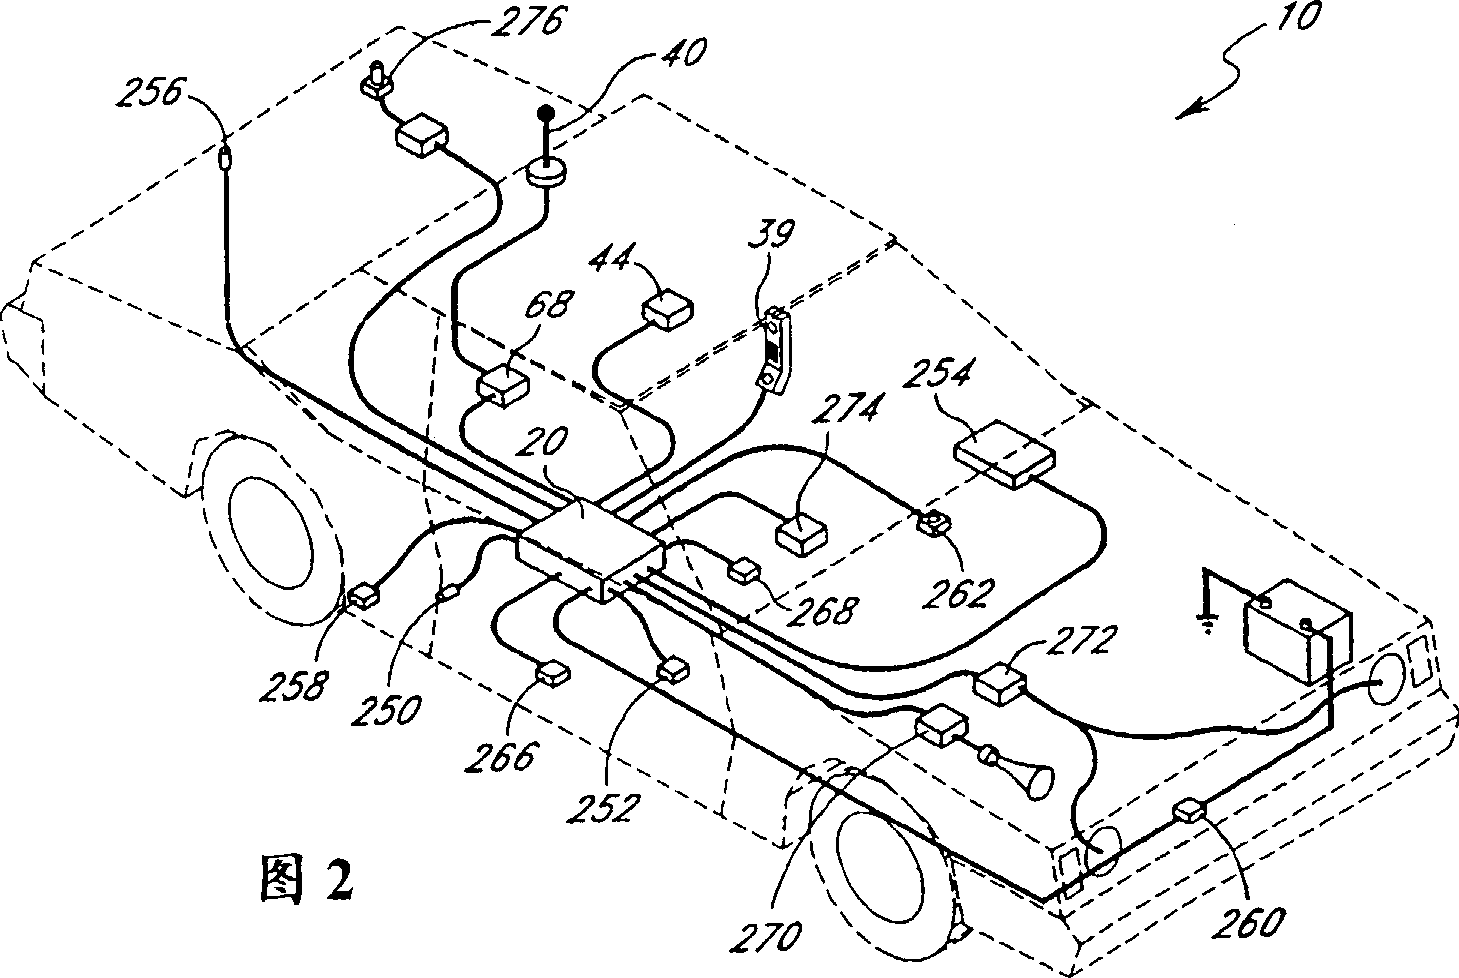 Vehicle tracking and security system incorporating simultaneous voice and data communication